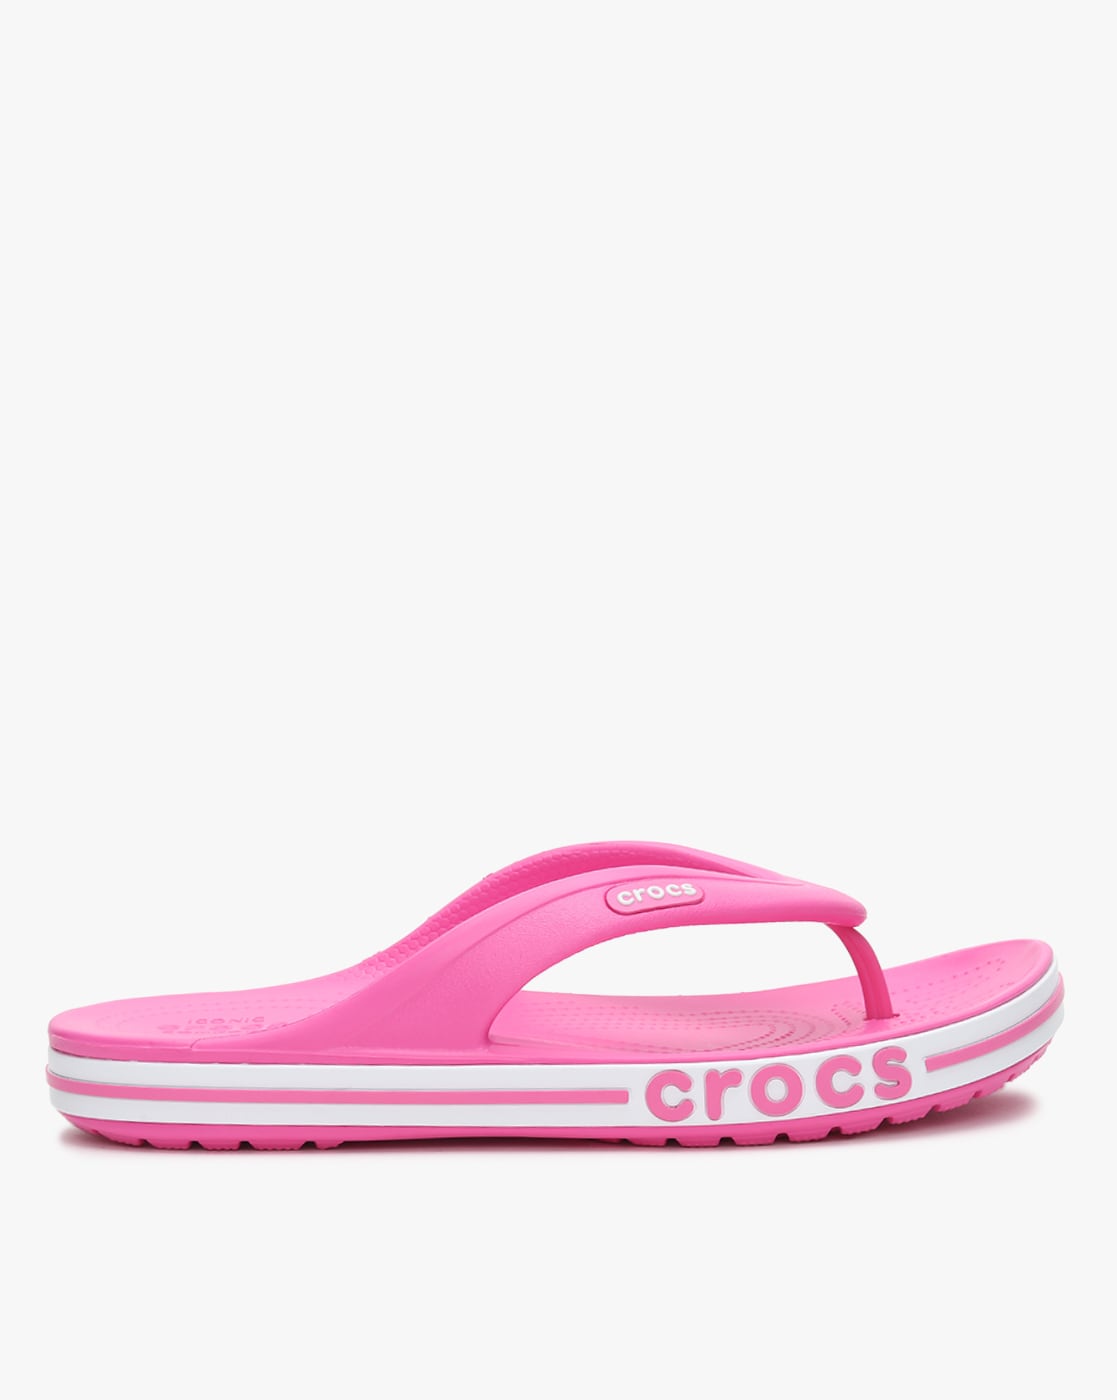 Crocs Slippers For Men and Women | Shopee Philippines-saigonsouth.com.vn